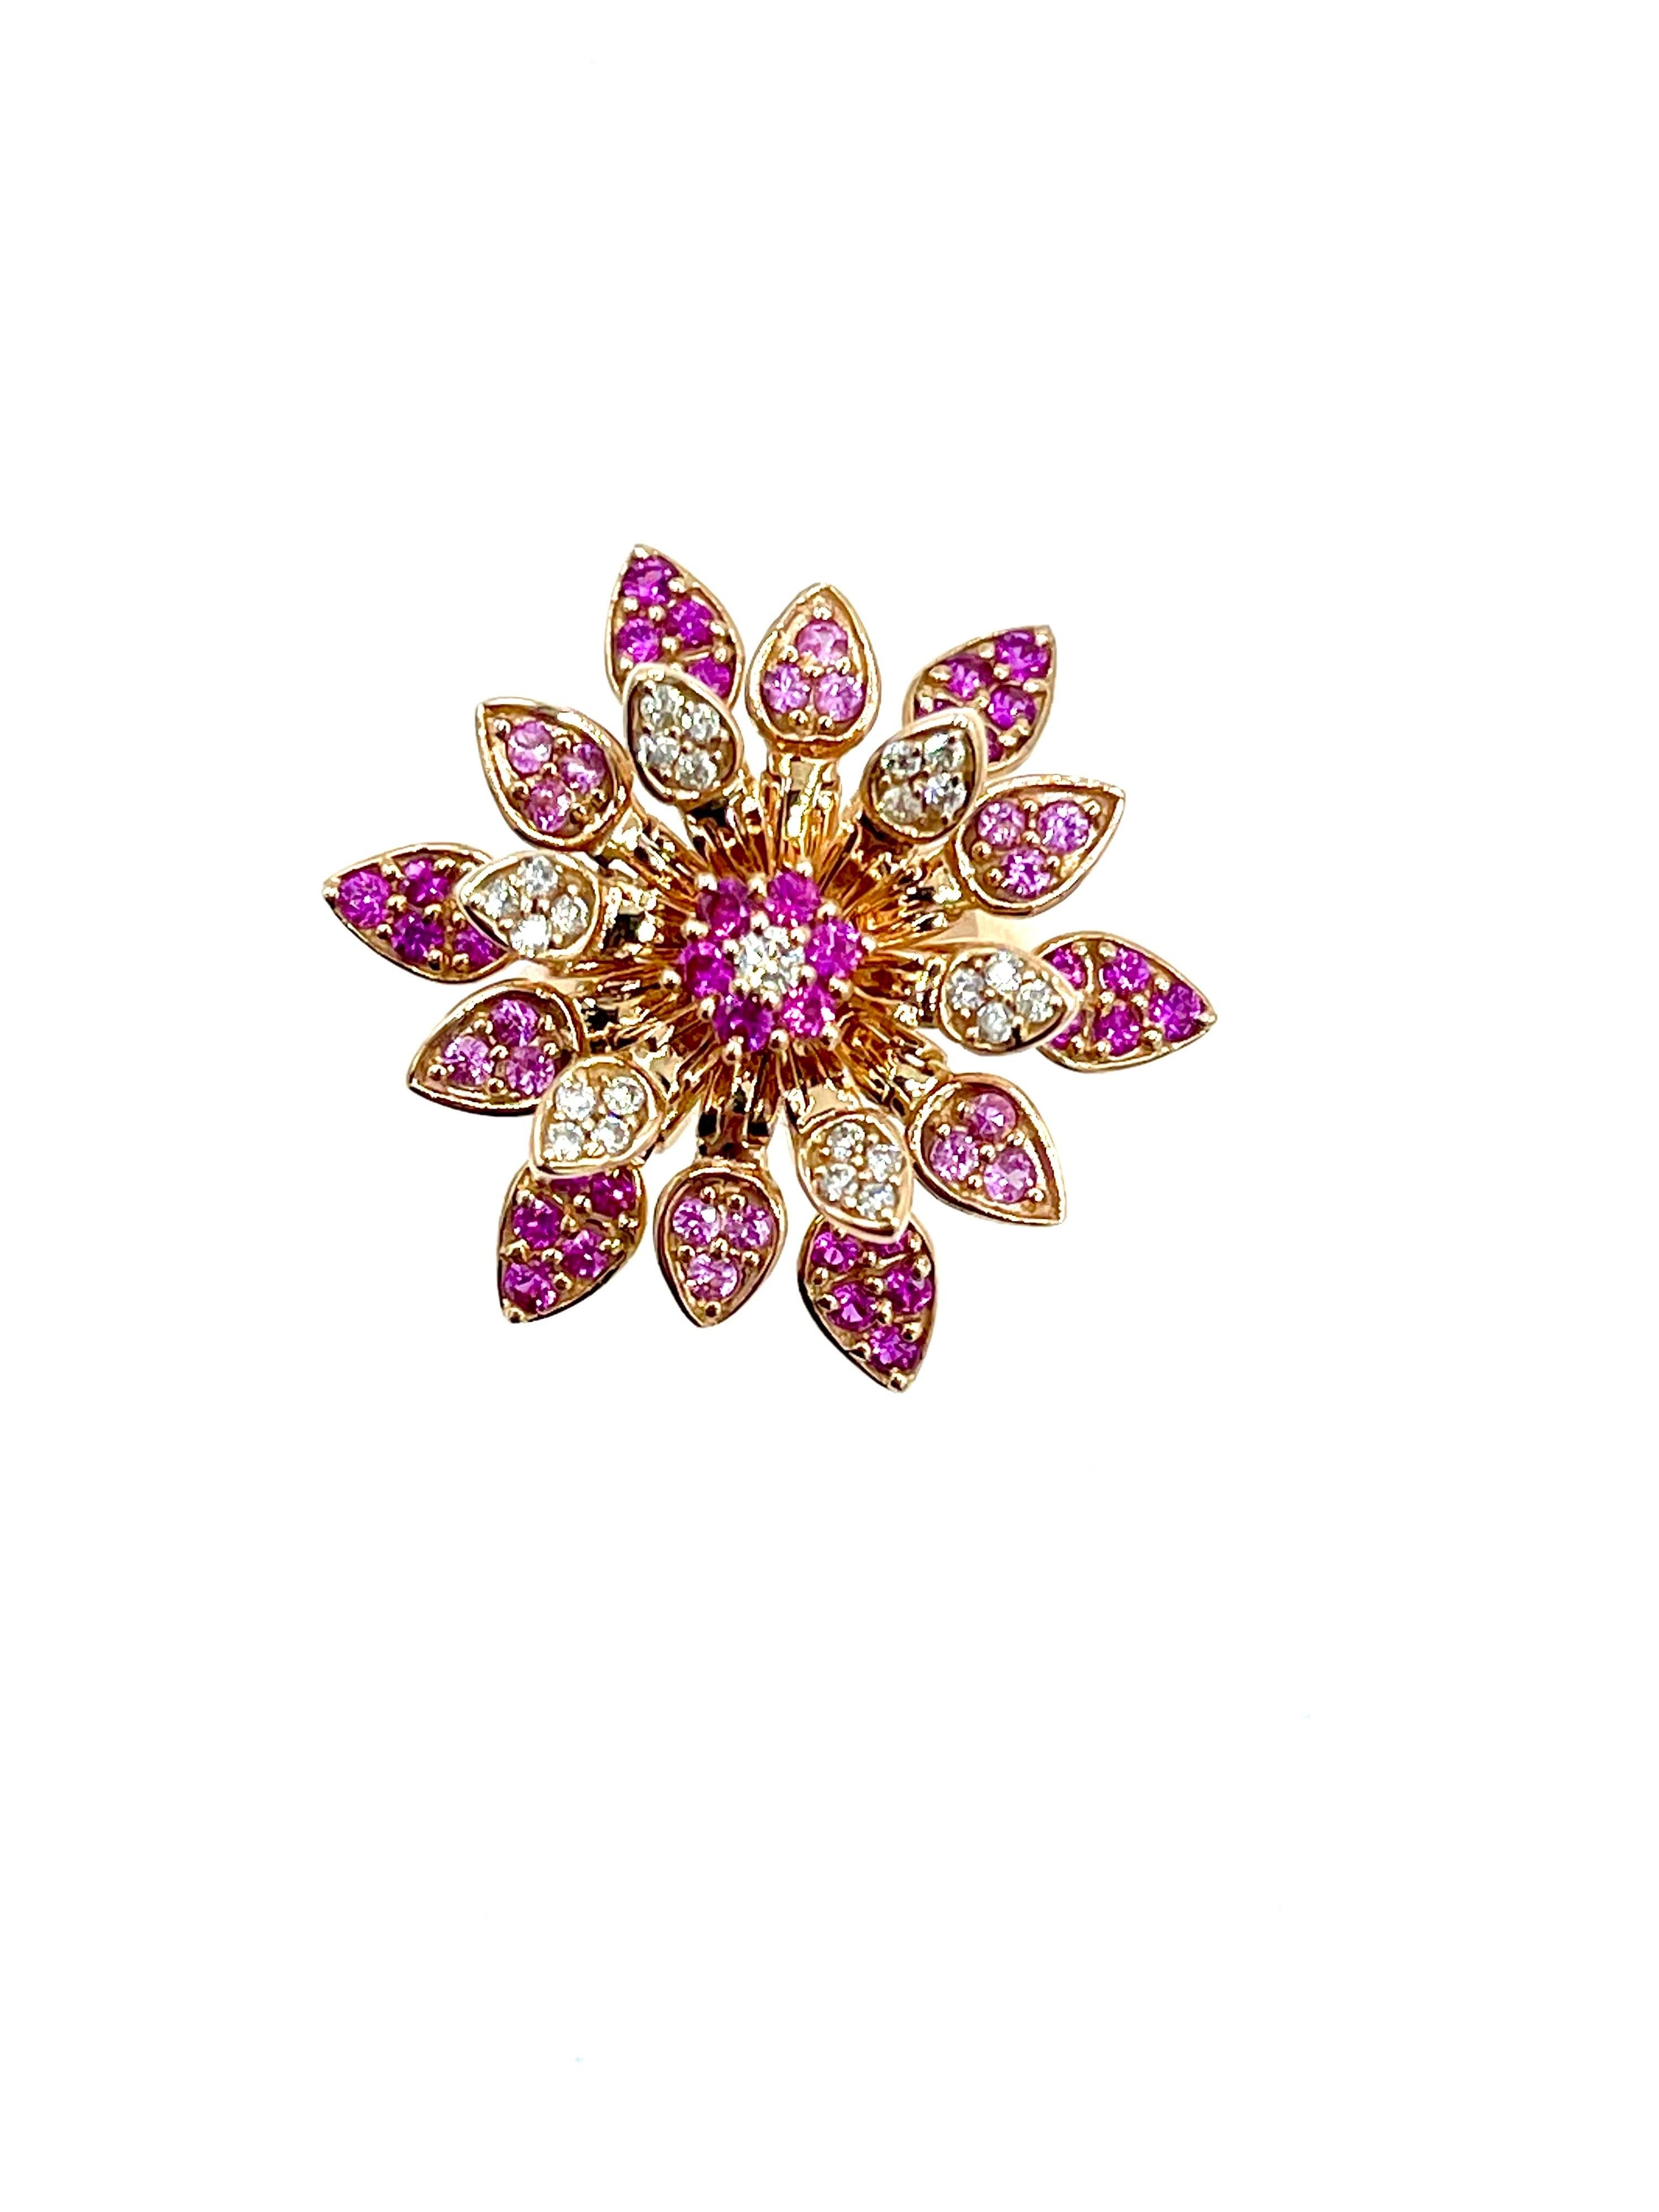 An Effy designed creative cocktail ring.  The ring is deigned as a blooming flower, set with Pink Sapphires and Diamonds in the petals.  There are a total of 1.00 carat in round Pink Sapphires, and 0.26 carats in round brilliant Diamonds.  The